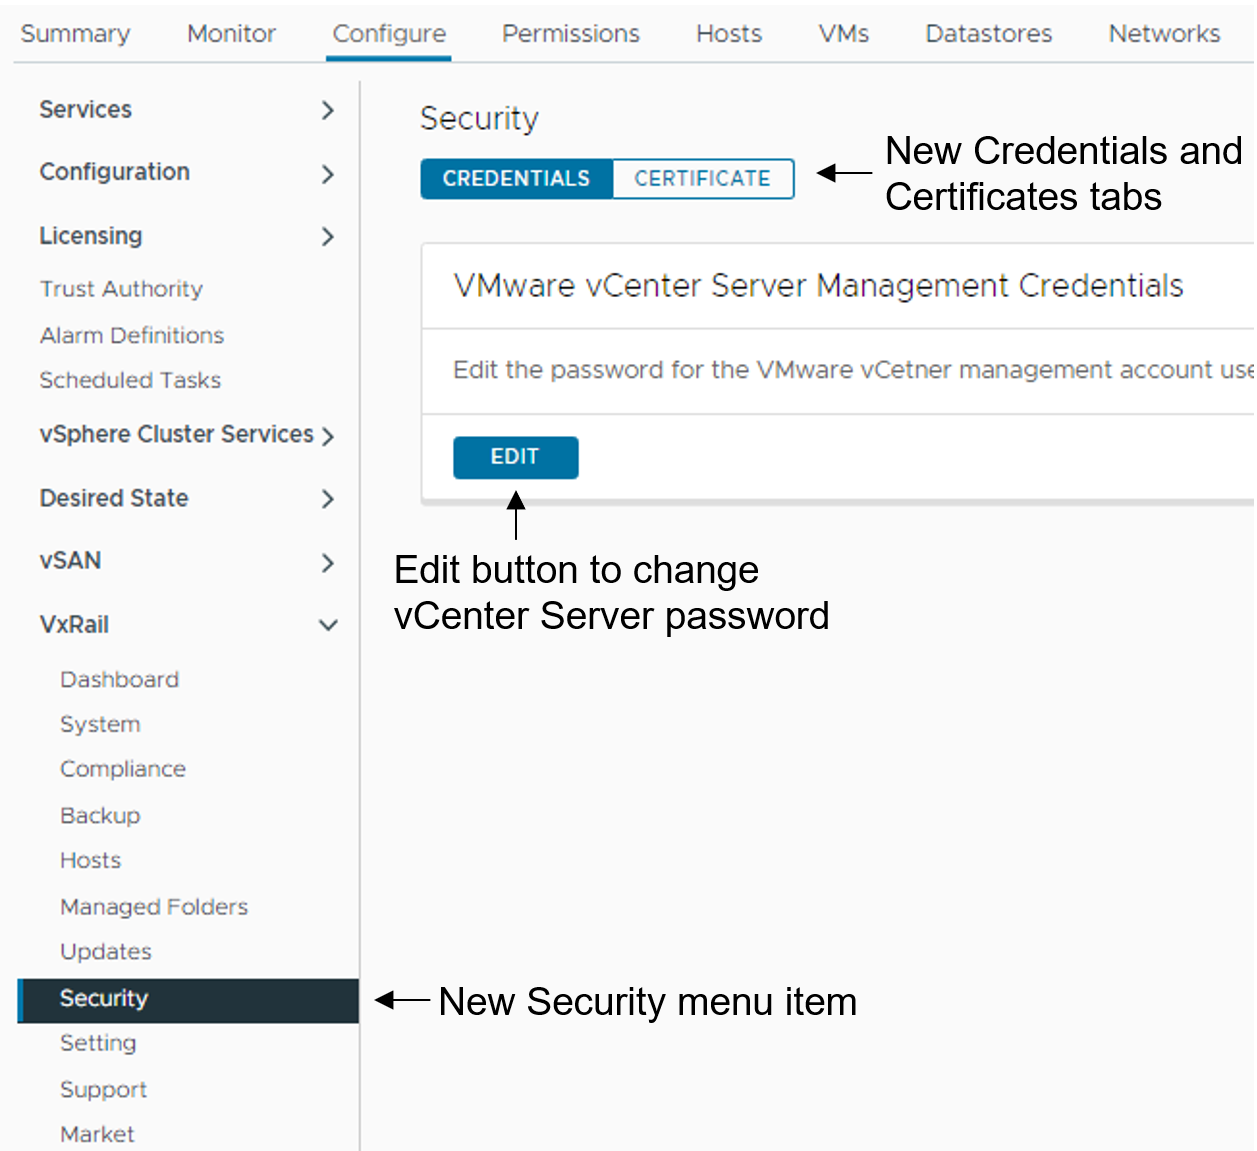 This figure highlights how to change passwords. Go to the Security tab on the left side of the VxRail Update Manager. There are two tabs: Credentials and Certificate, in that order. Click on Credentials to see an Edit button that allows you to change the vCenter server password.